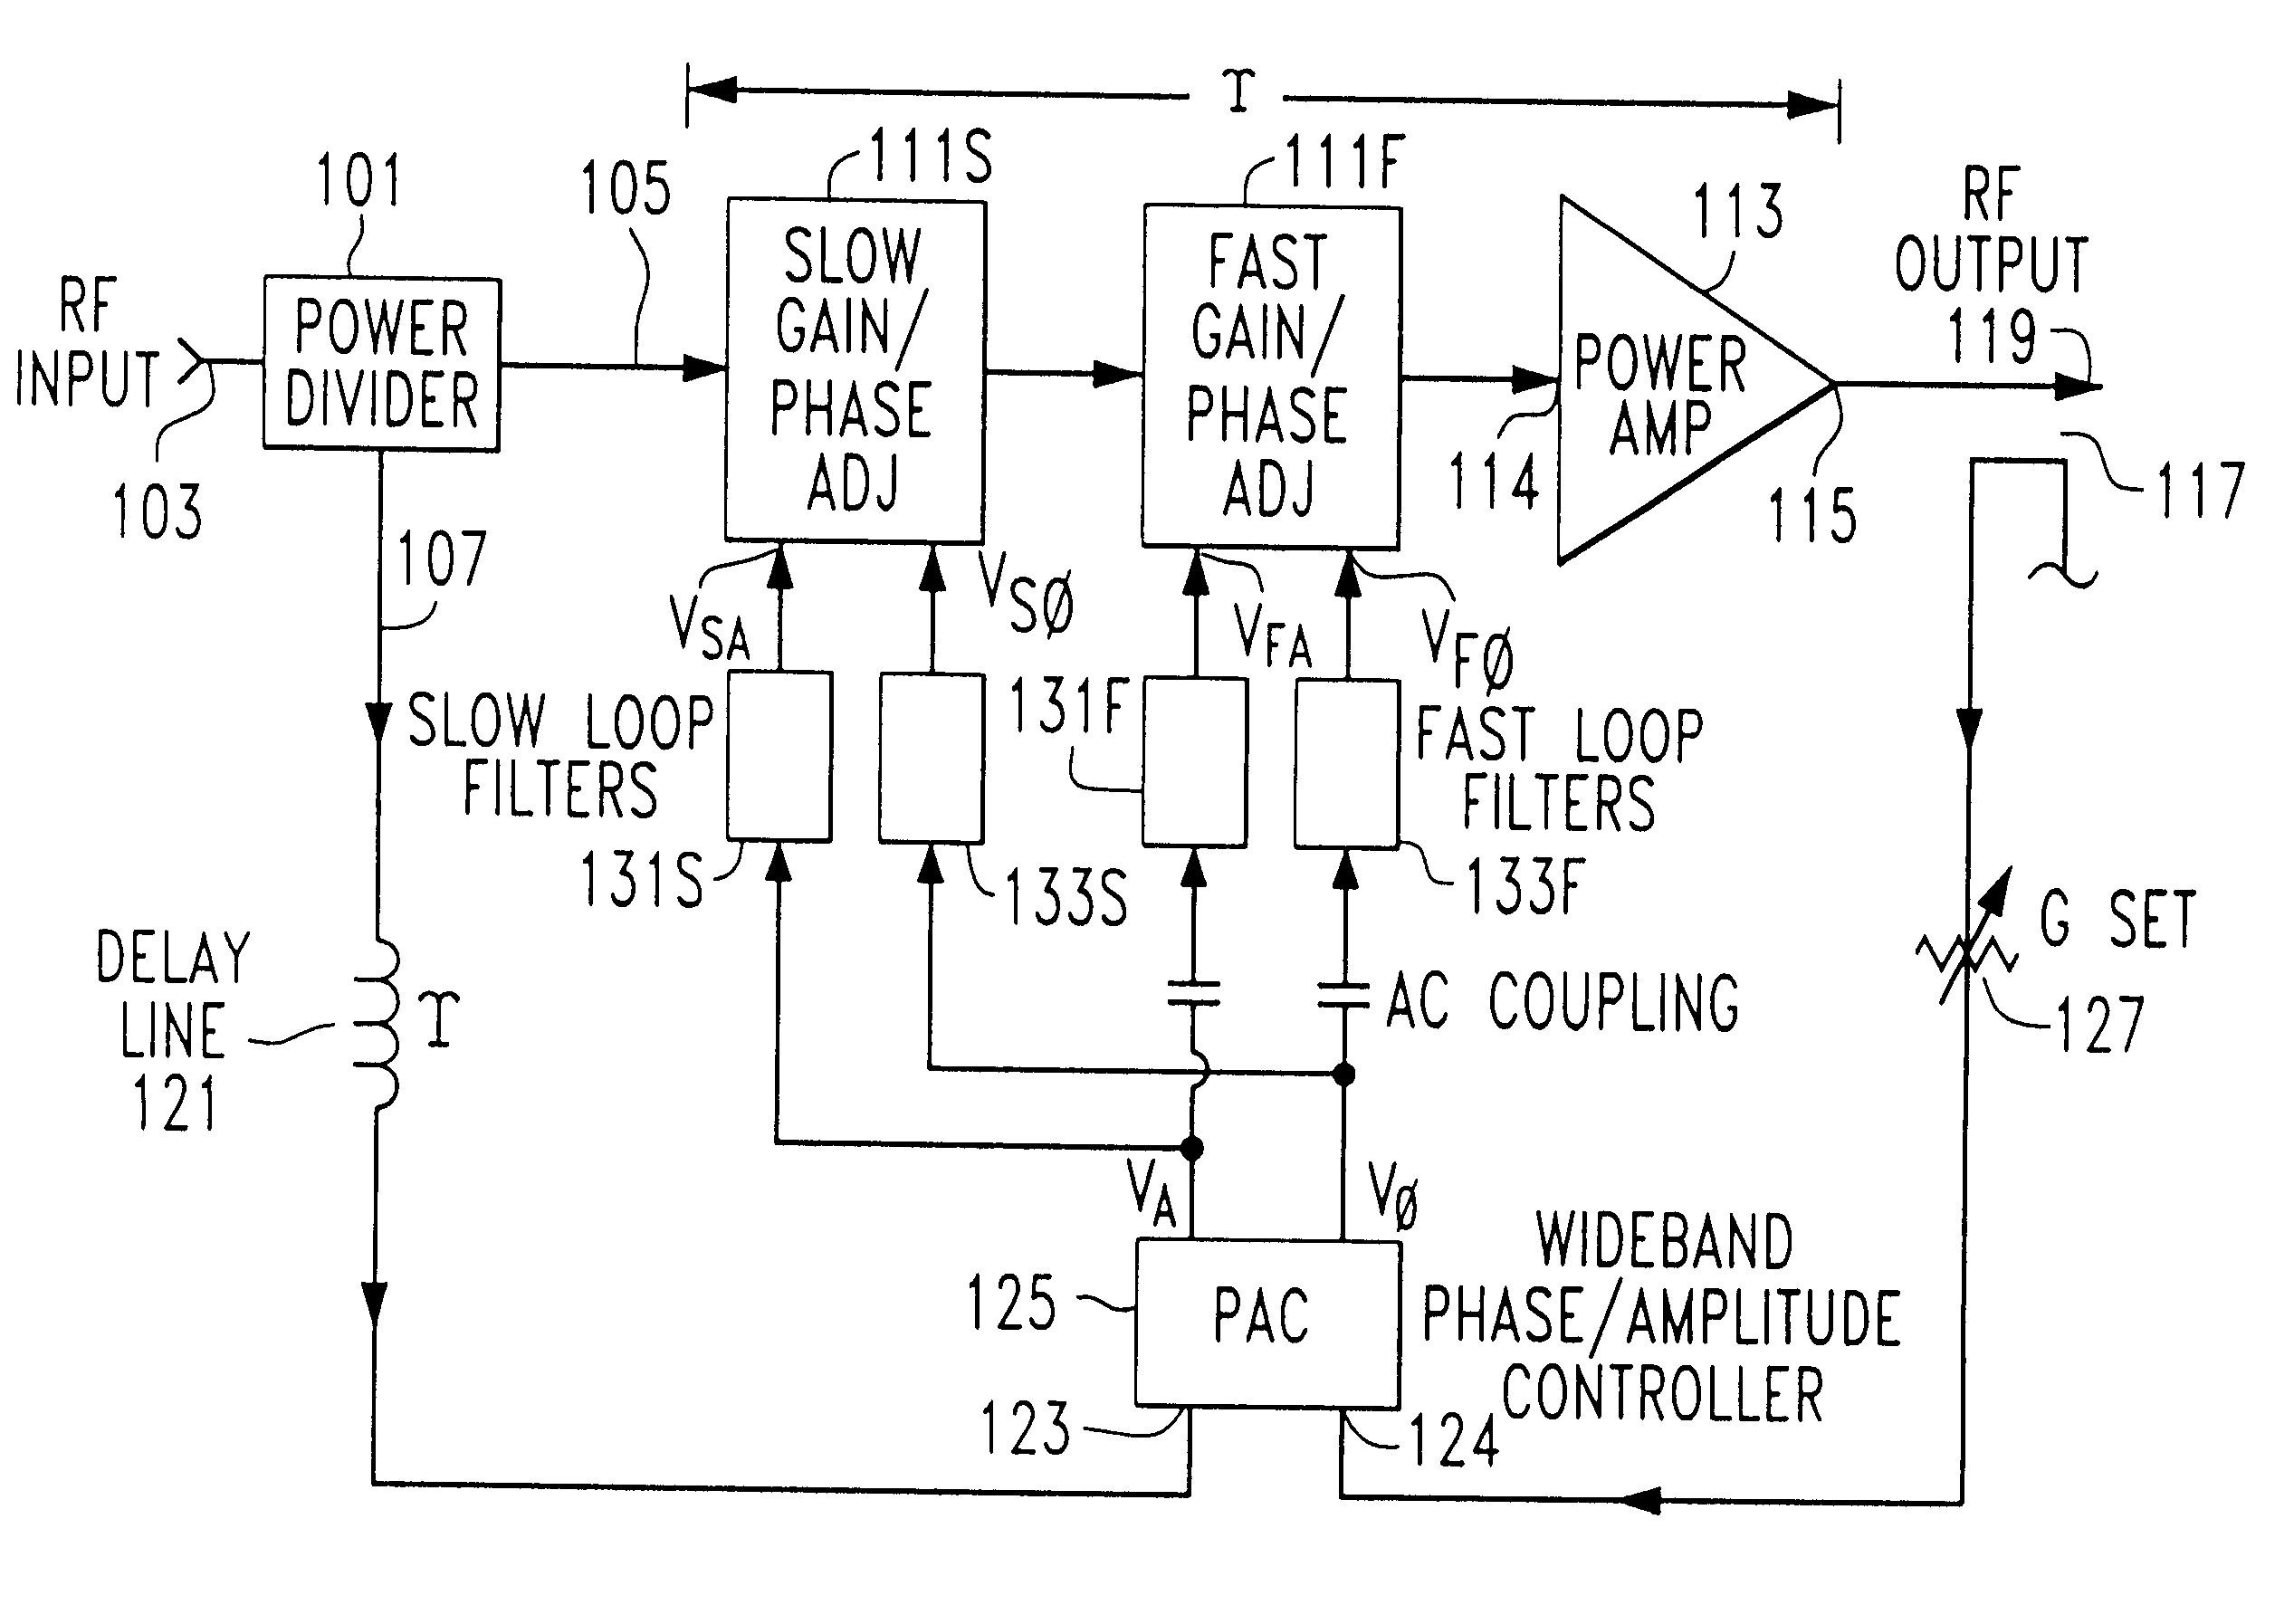 Polar envelope correction mechanism for enhancing linearity of RF/microwave power amplifier